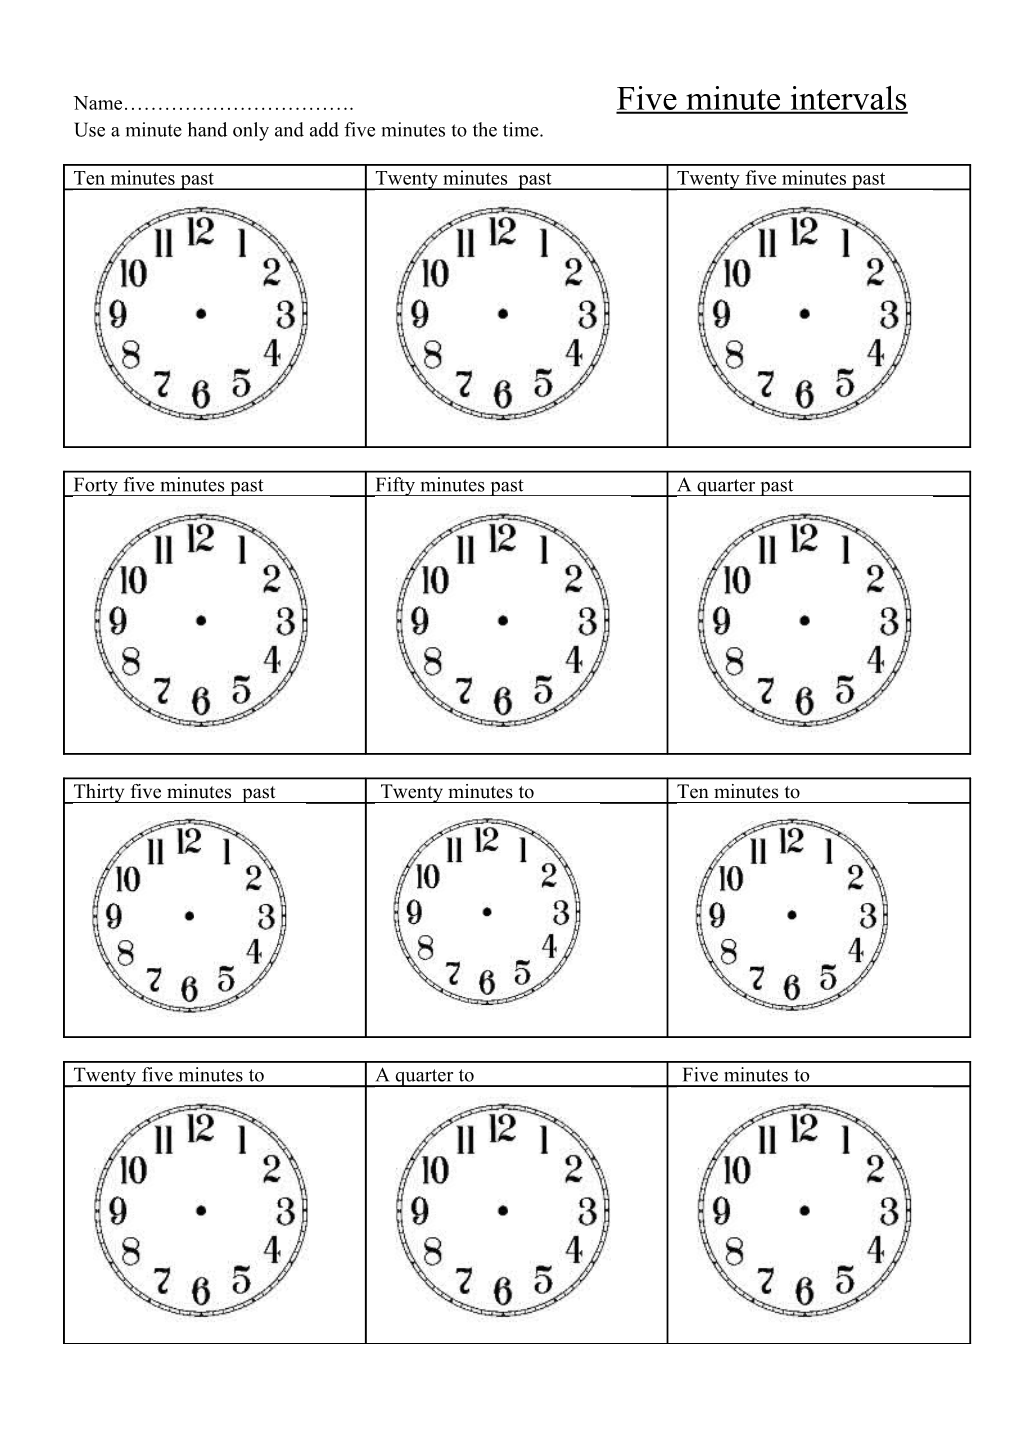 Use a Minute Hand Only and Add Five Minutes to the Time